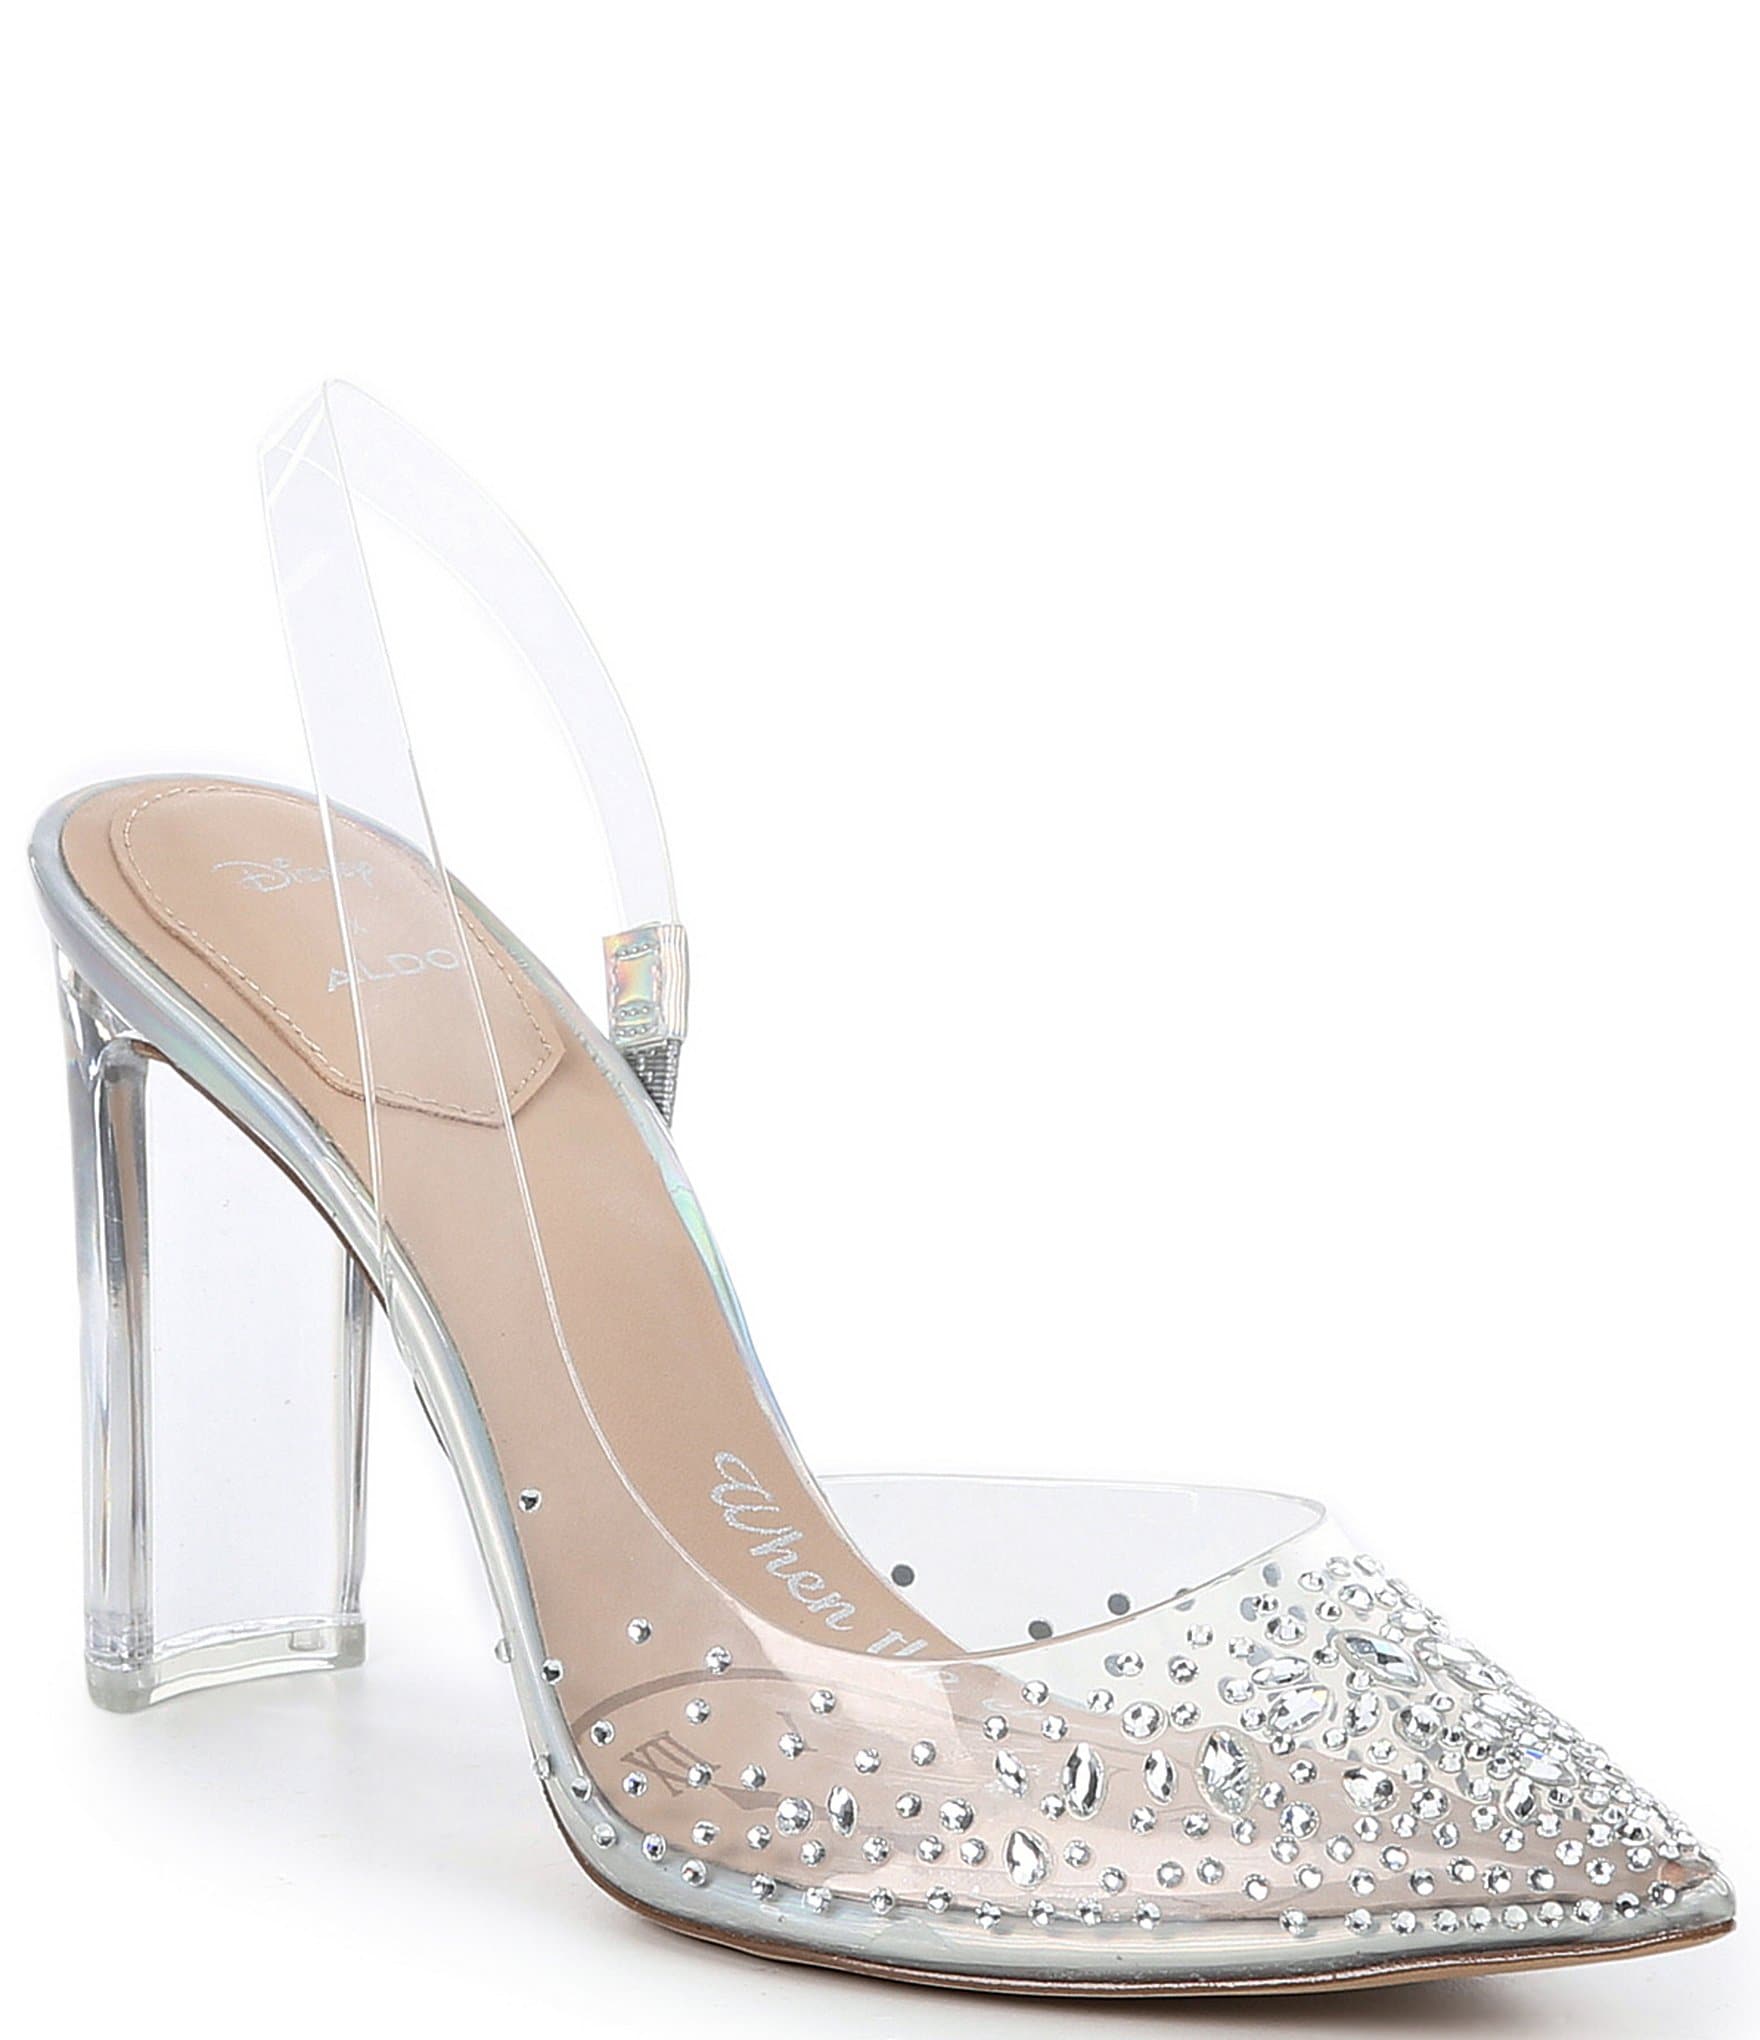 Aldo Just Released A Cinderella Shoe Collection That Dazzles 